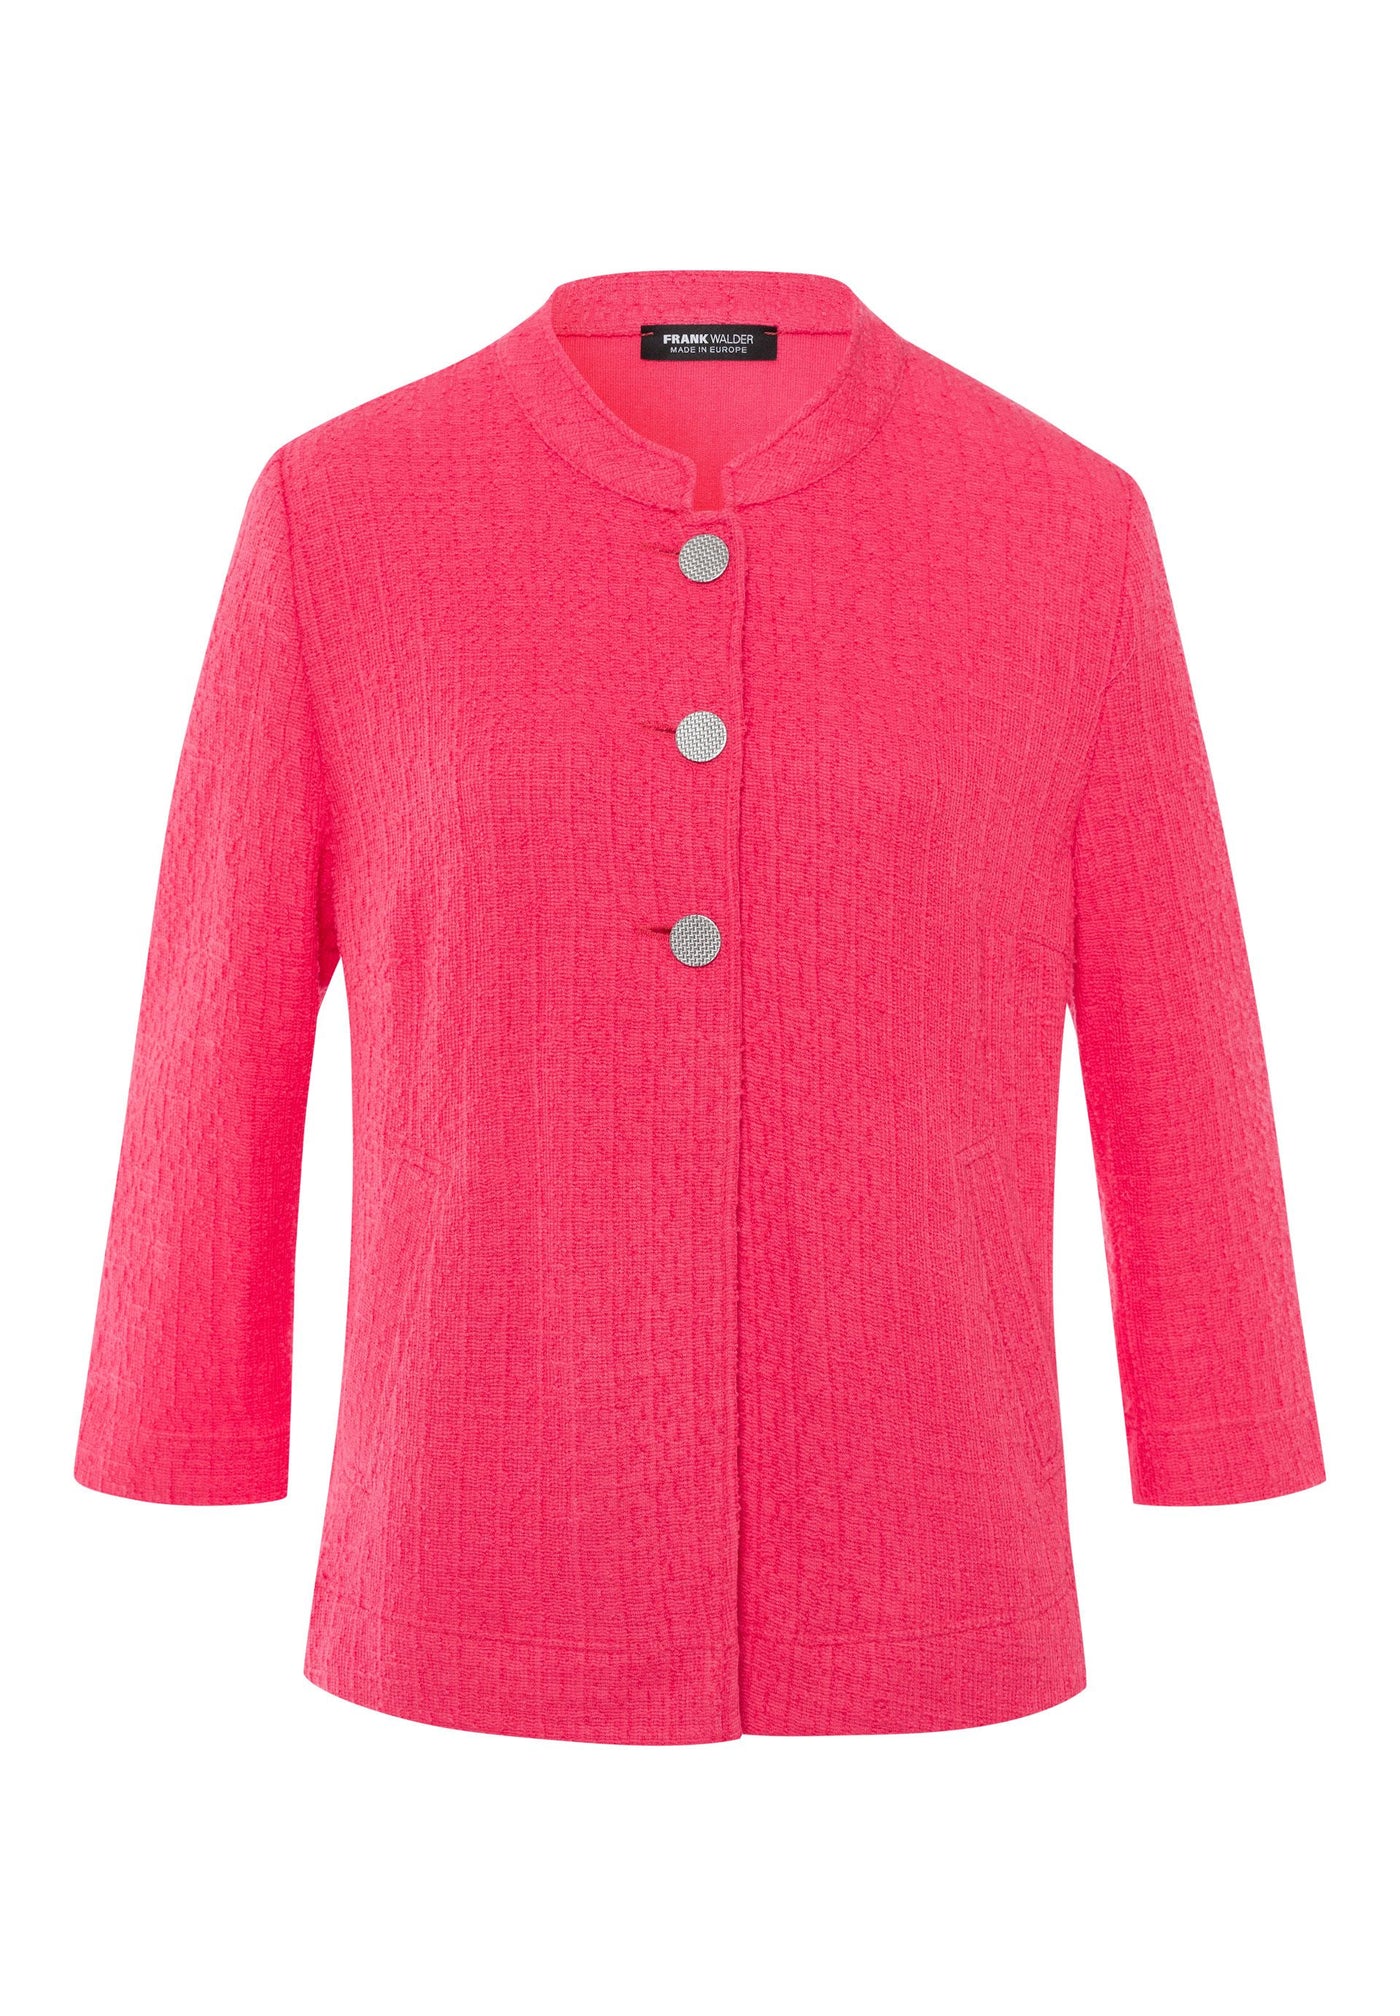 Soft Pink Tweed Style Round Neck Jacket with Buttons